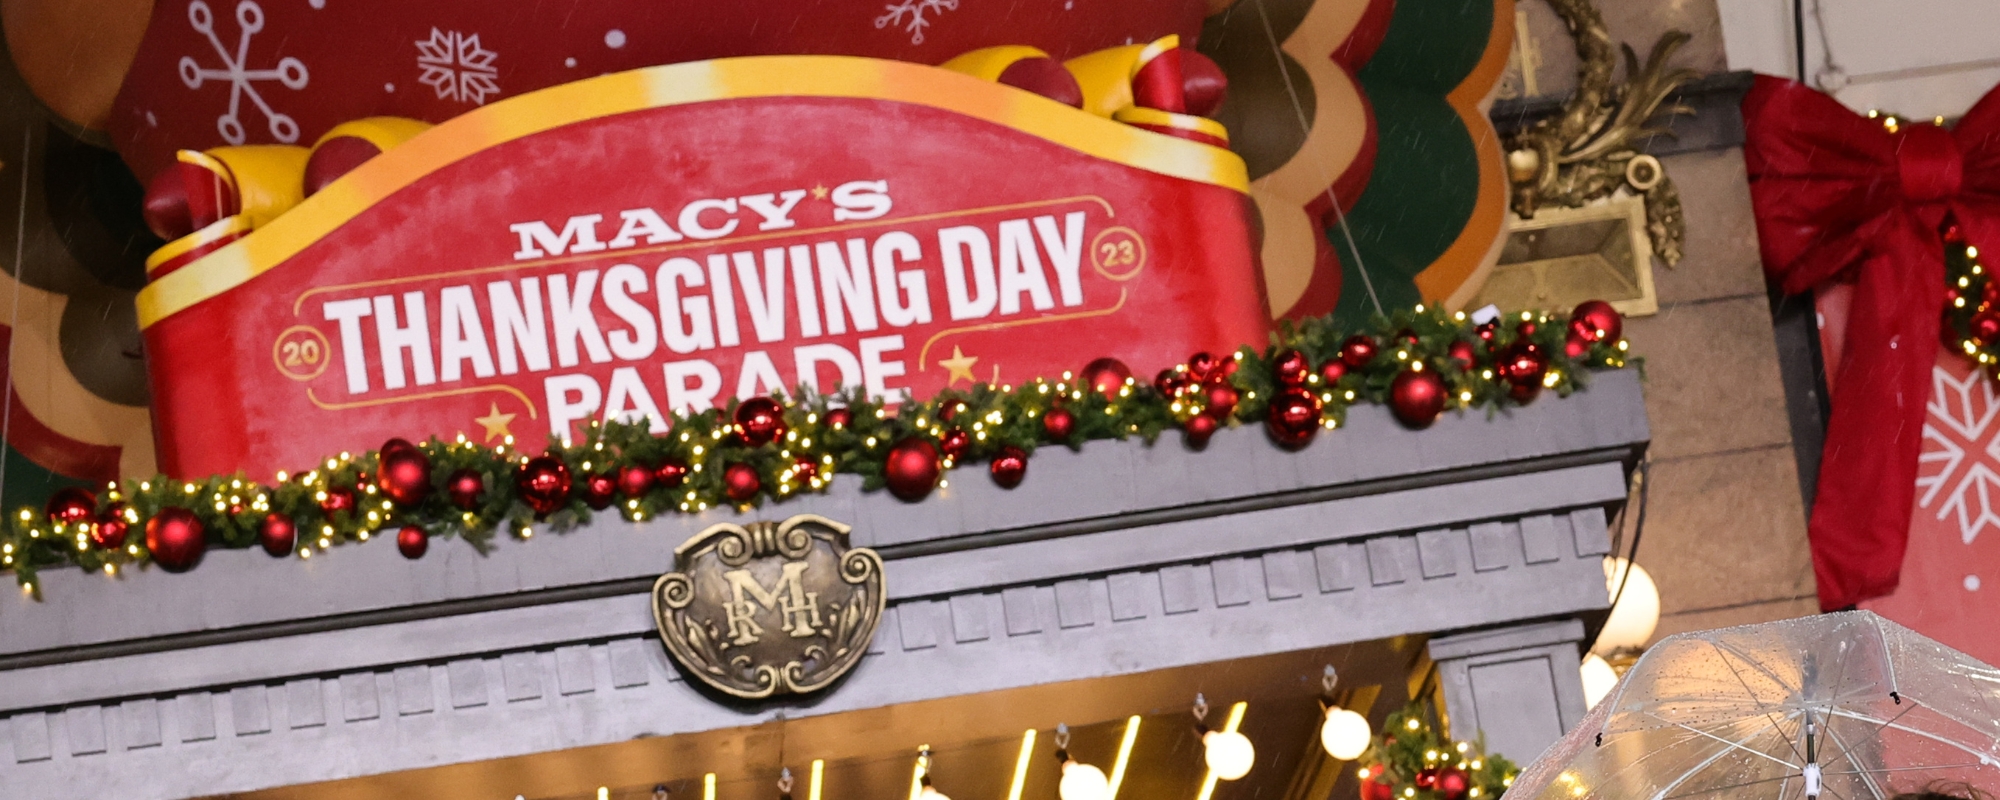 Social Media Erupts Over Broadway Musical About Corn at the Macy’s Thanksgiving Day Parade